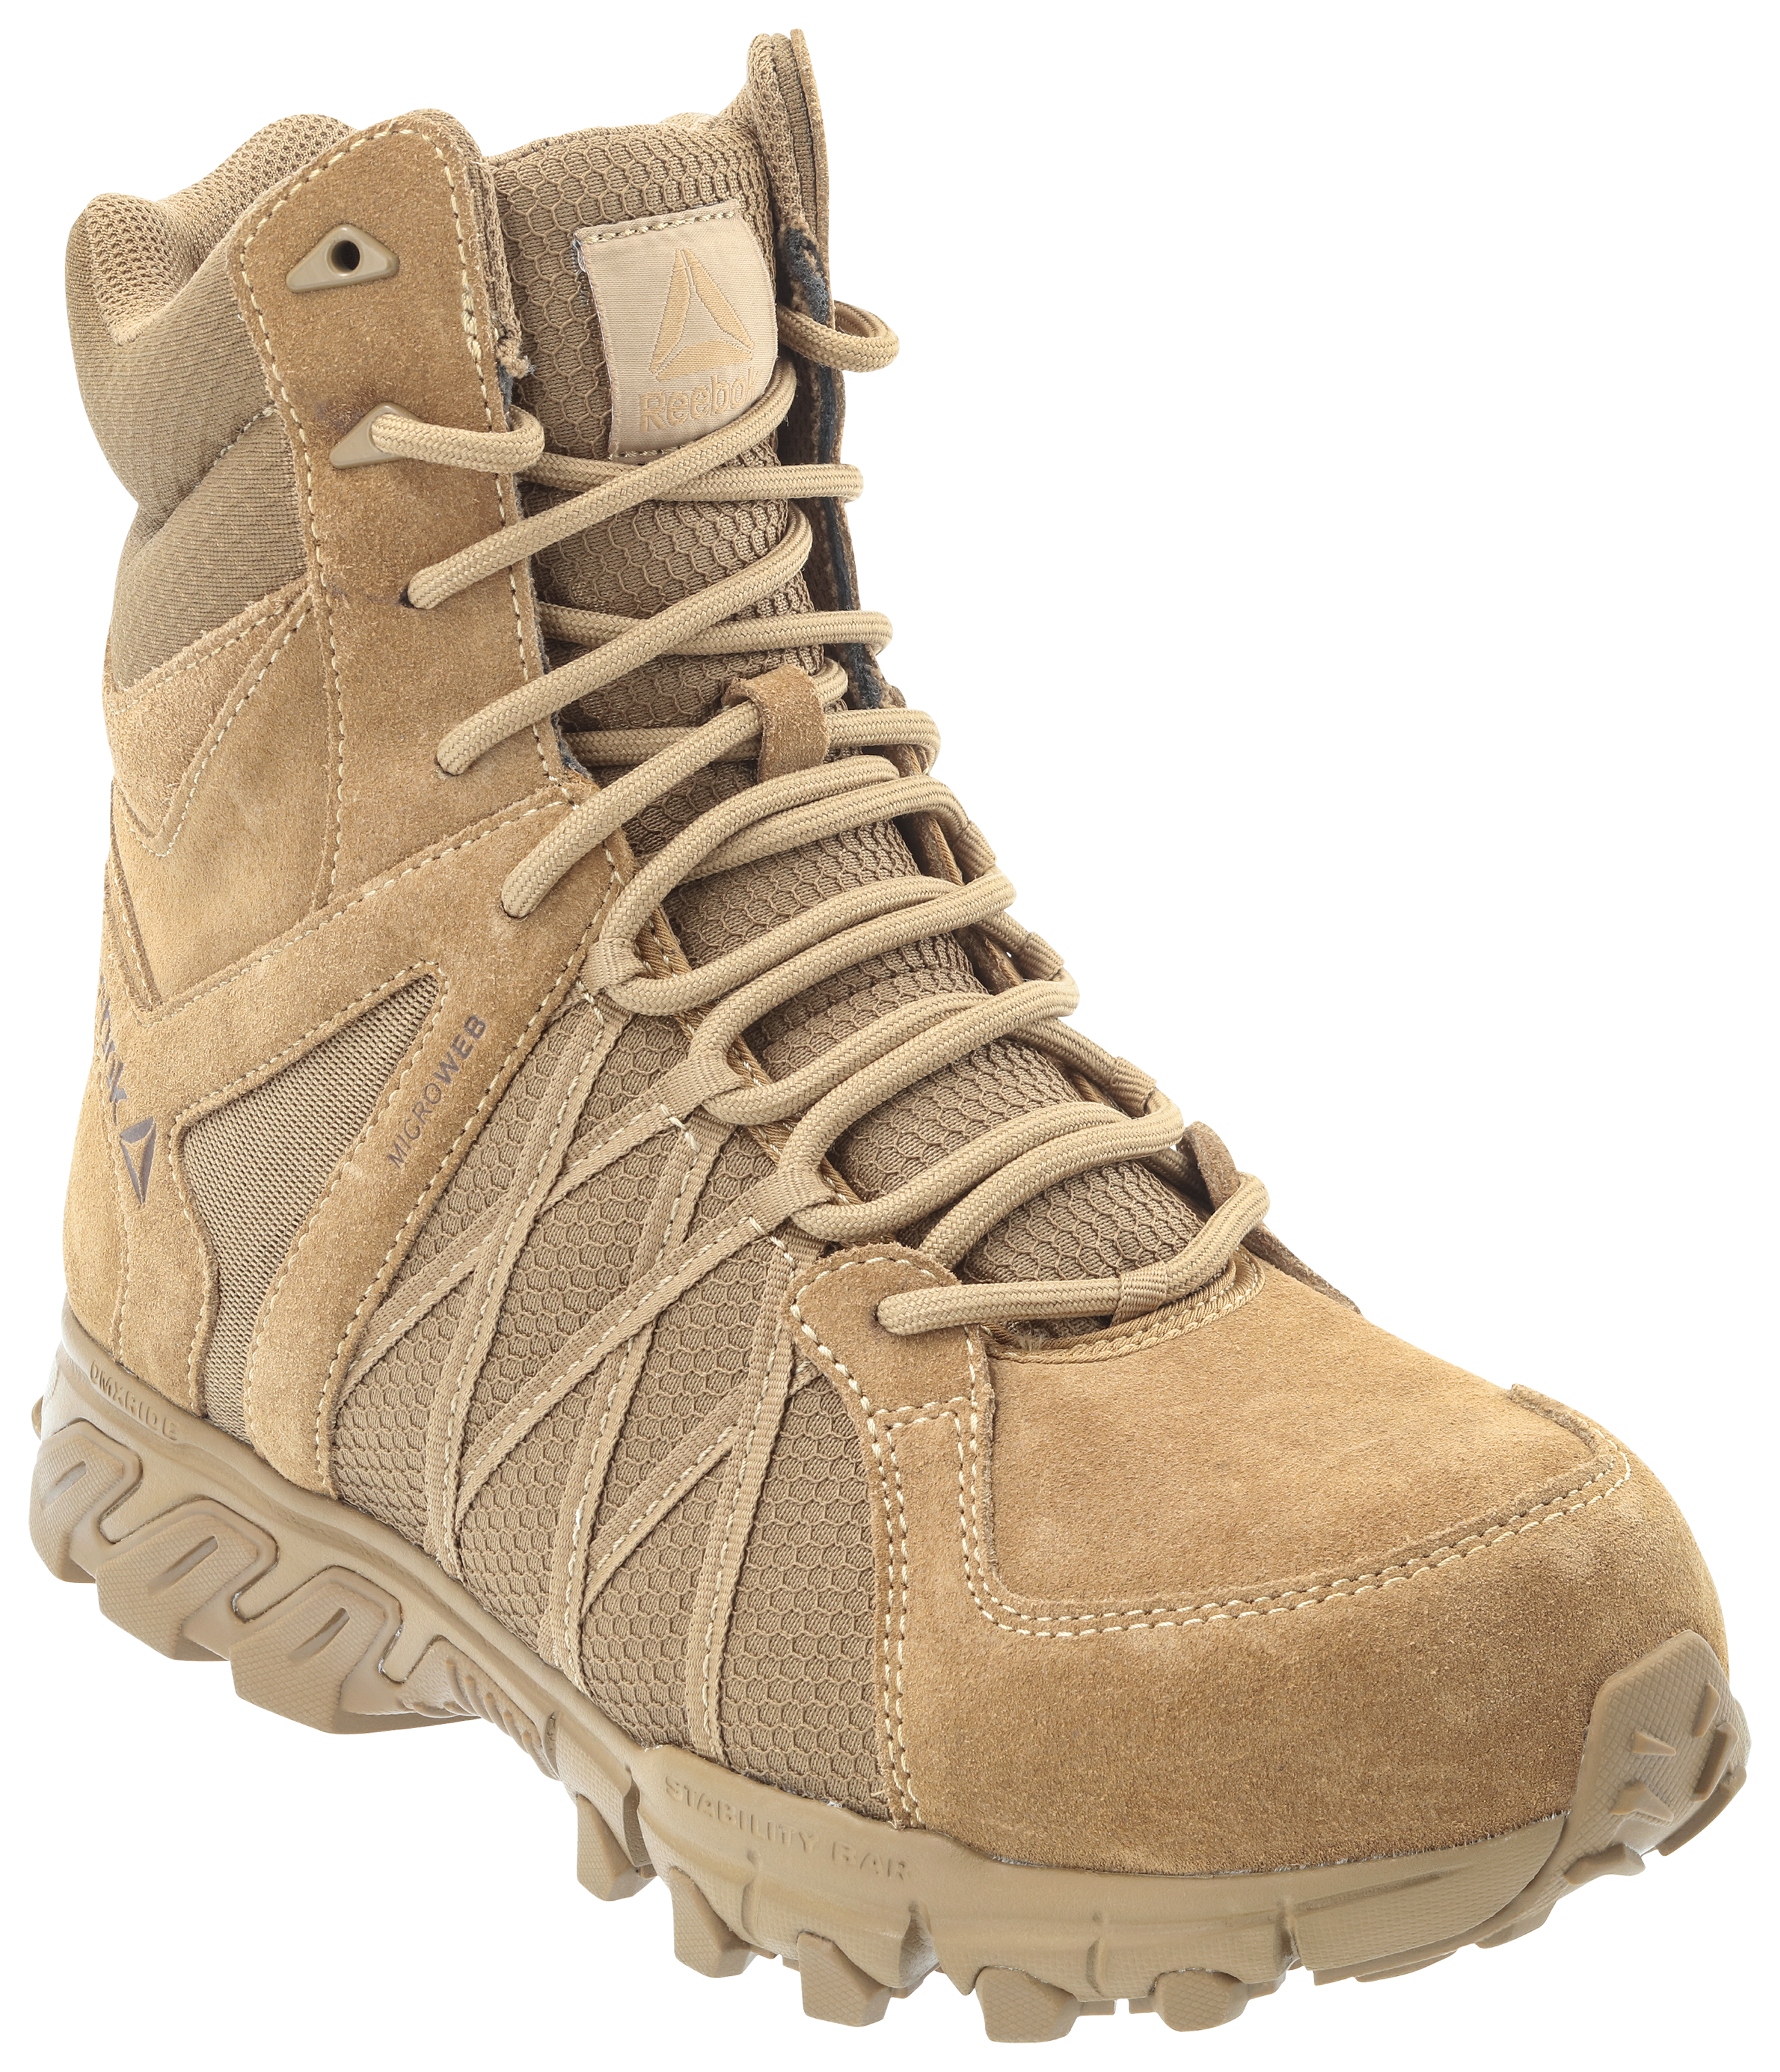 Reebok Trailgrip Tactical Composite Toe Side Zip Work Boots for Men - Coyote Brown - 13M